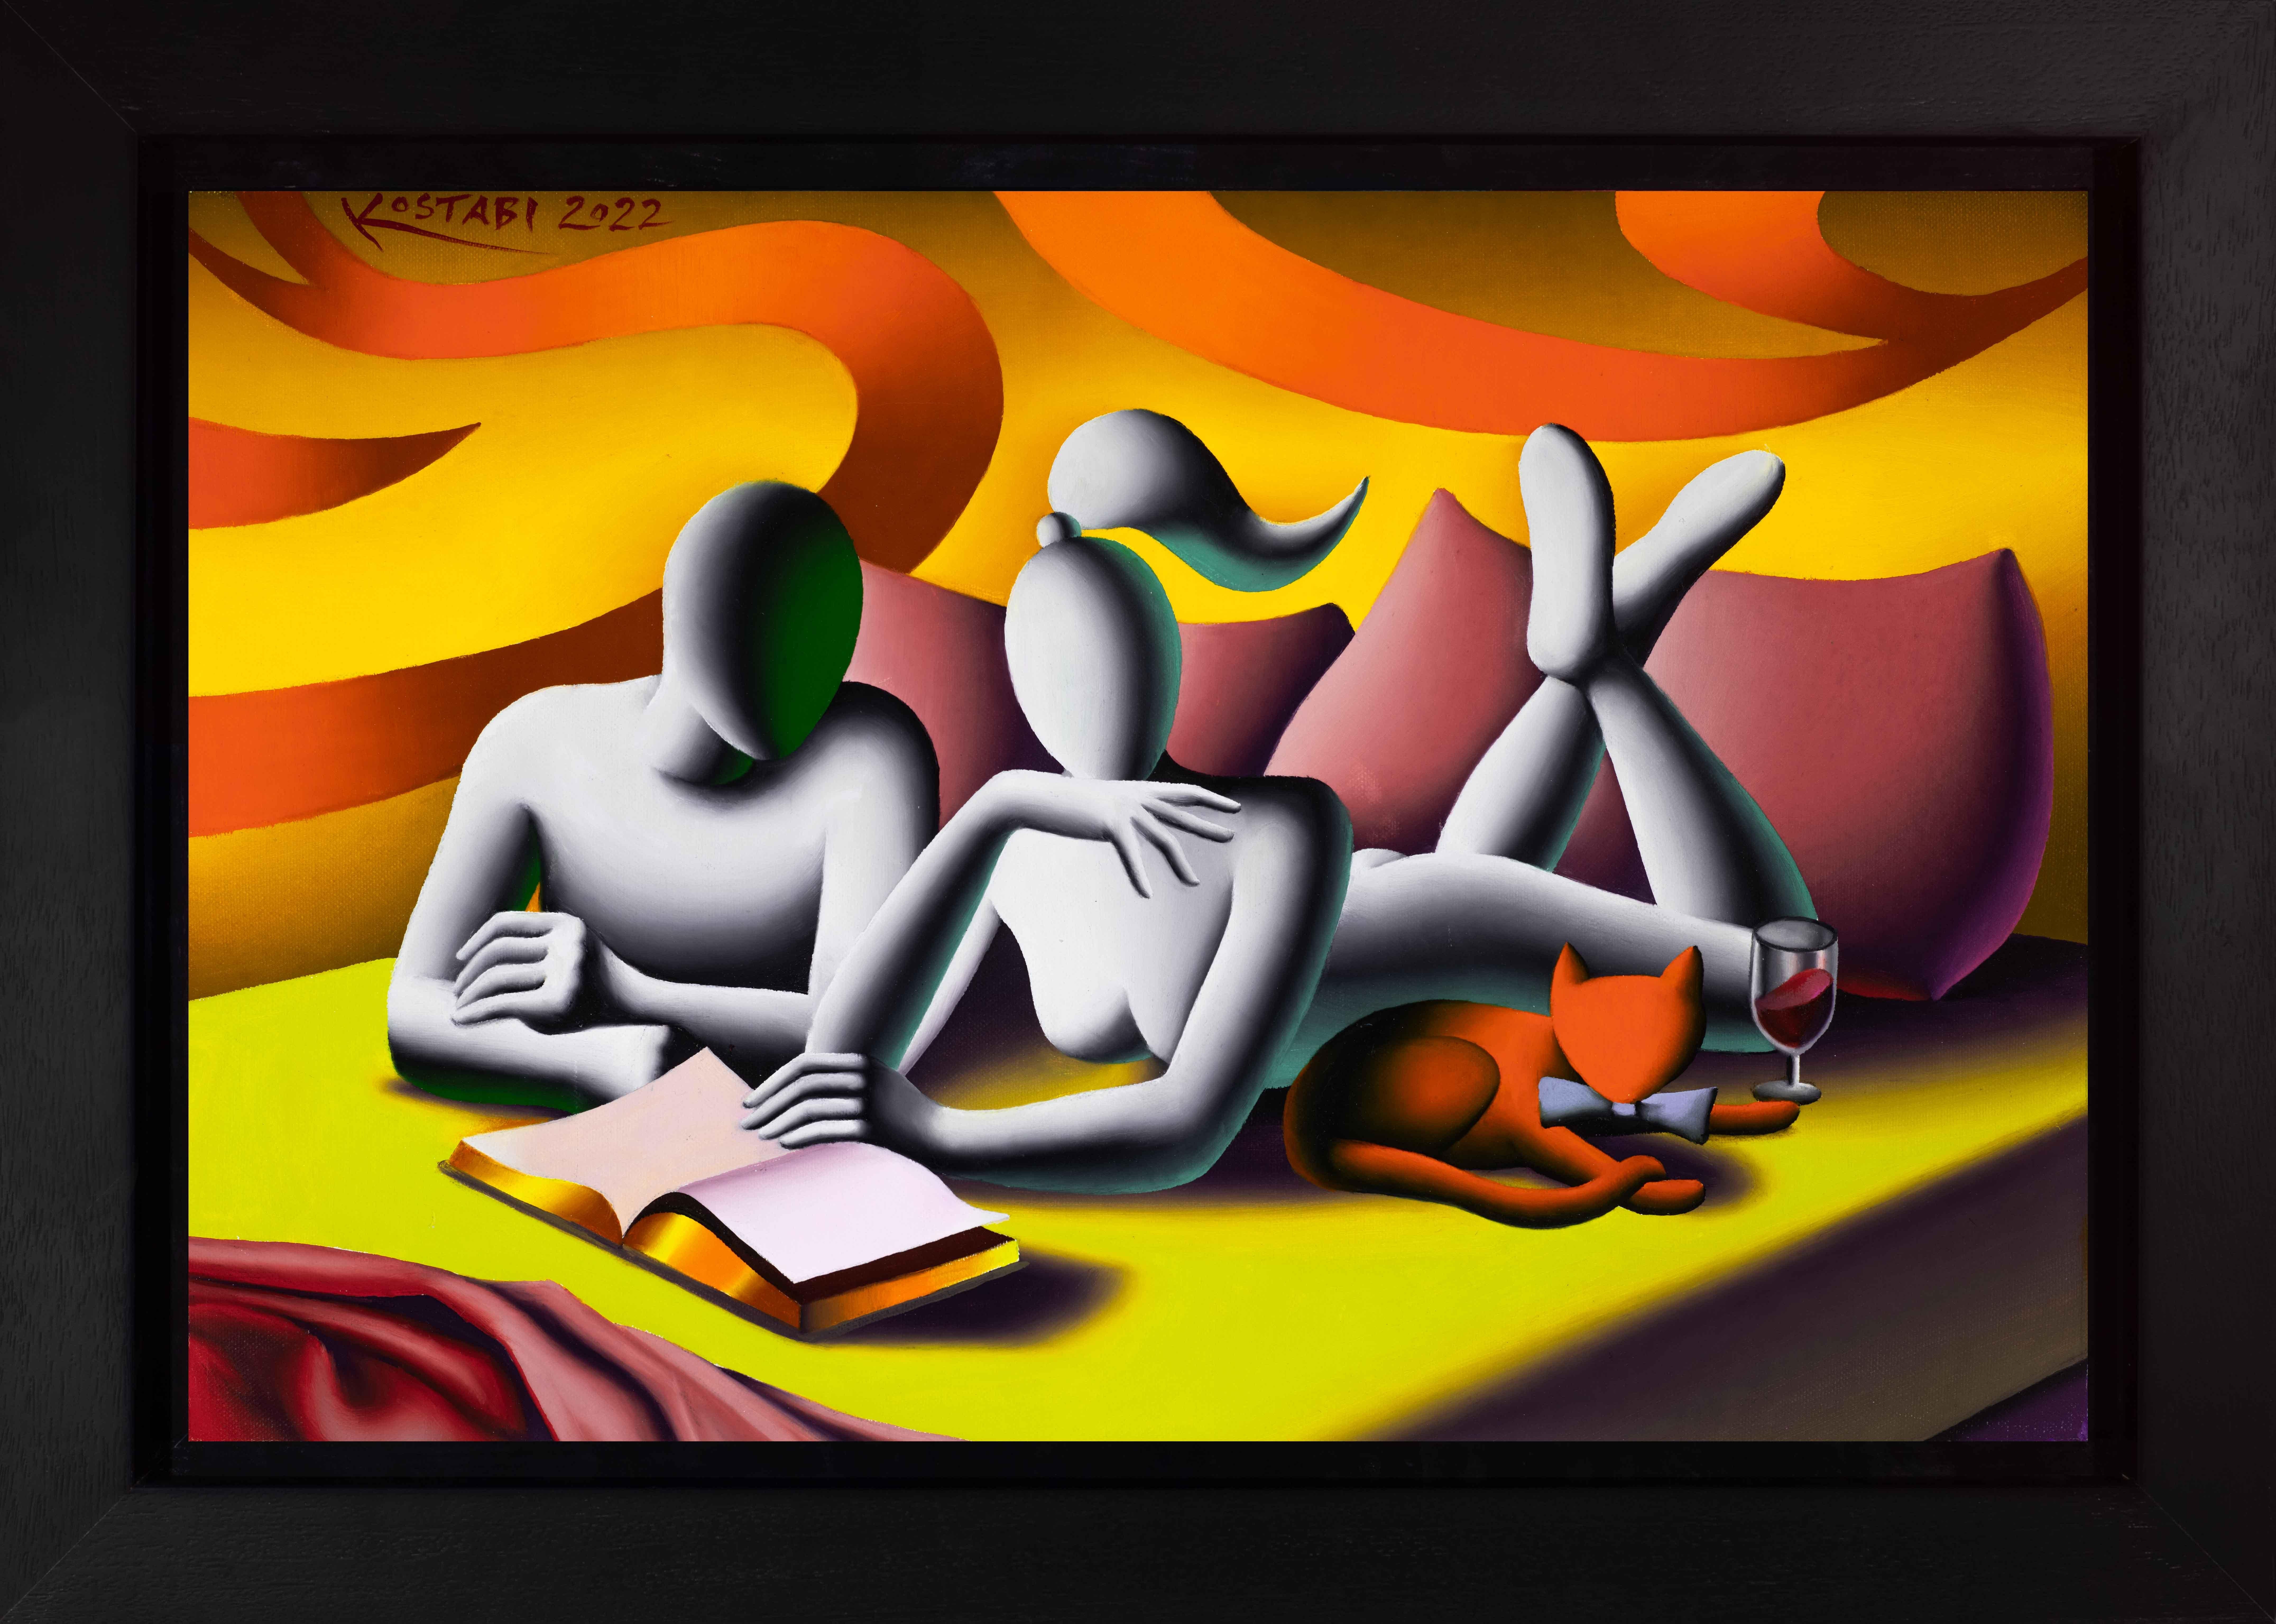 Lit Cats, 2022 - Contemporary Painting by Mark Kostabi